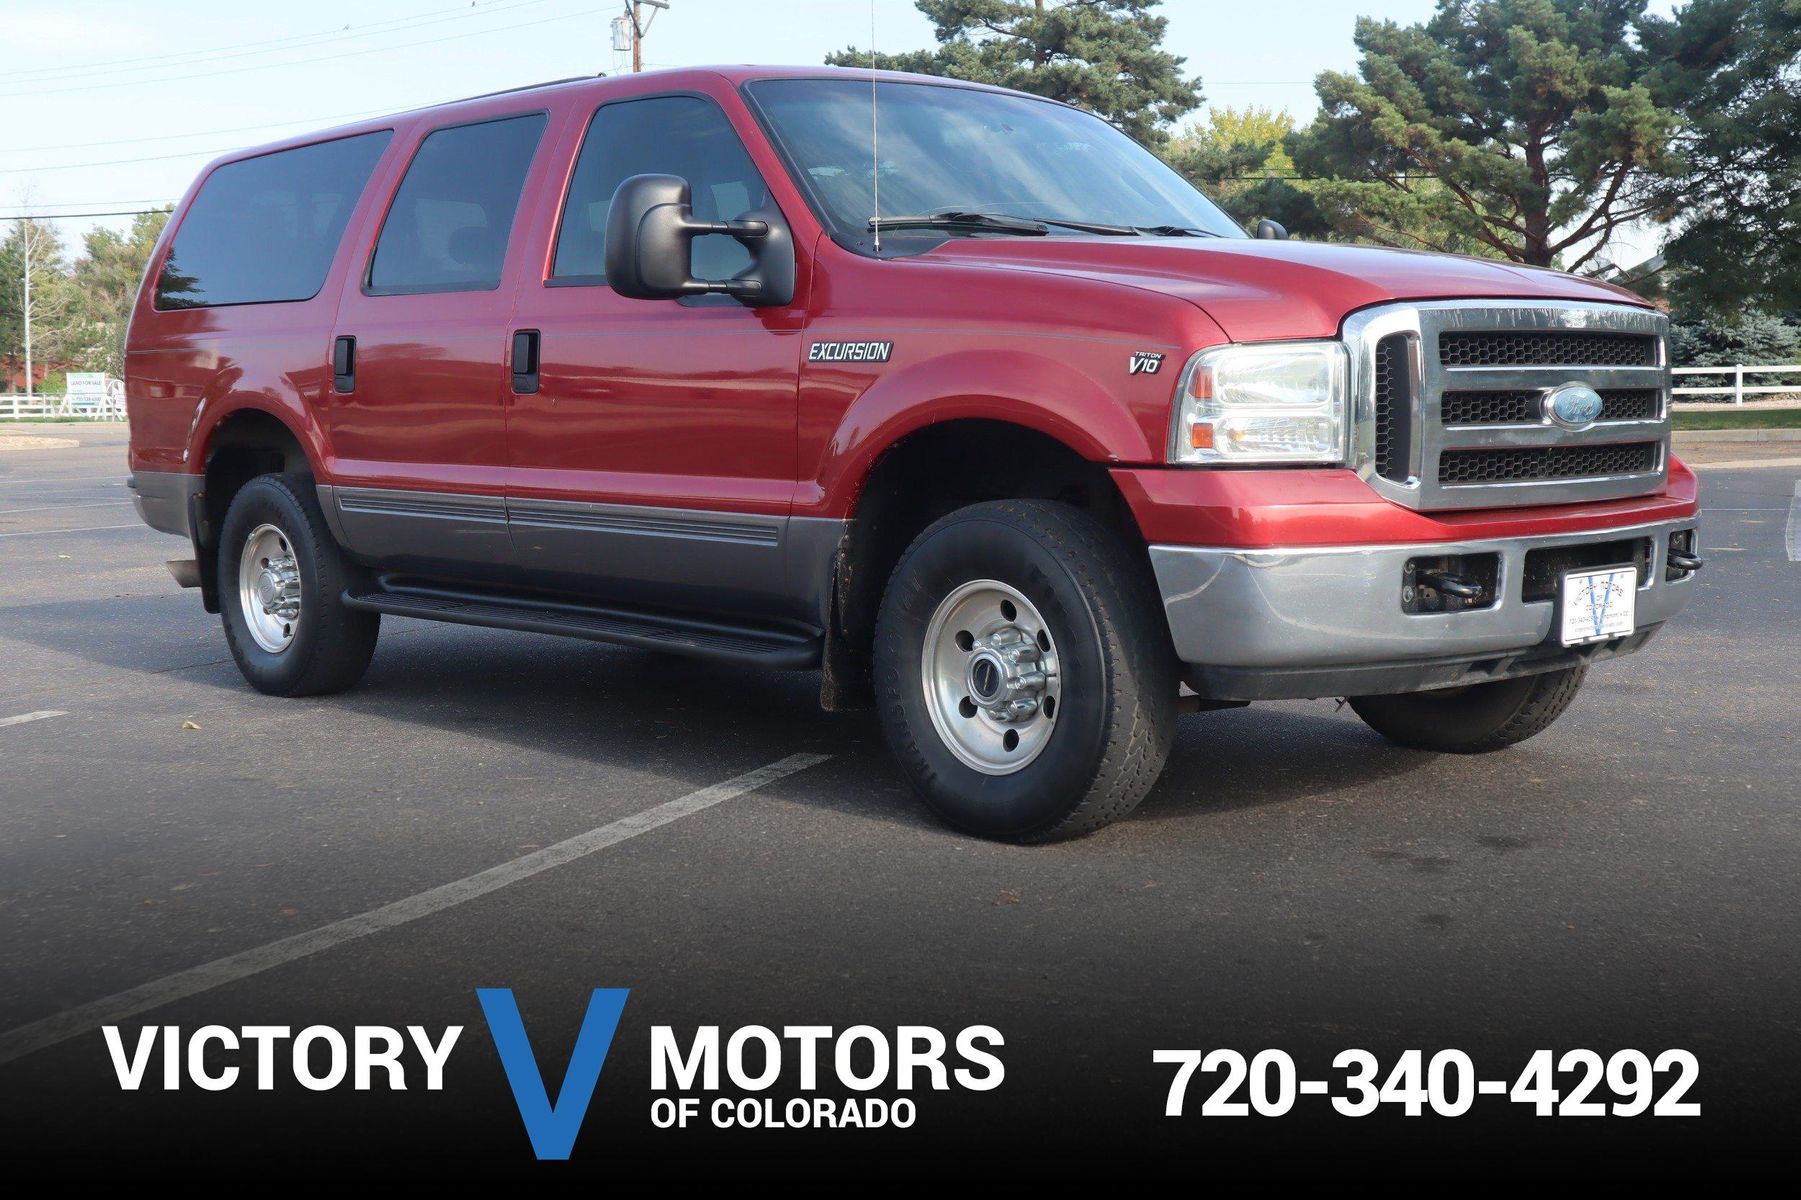 2005 ford excursion xlt configurations